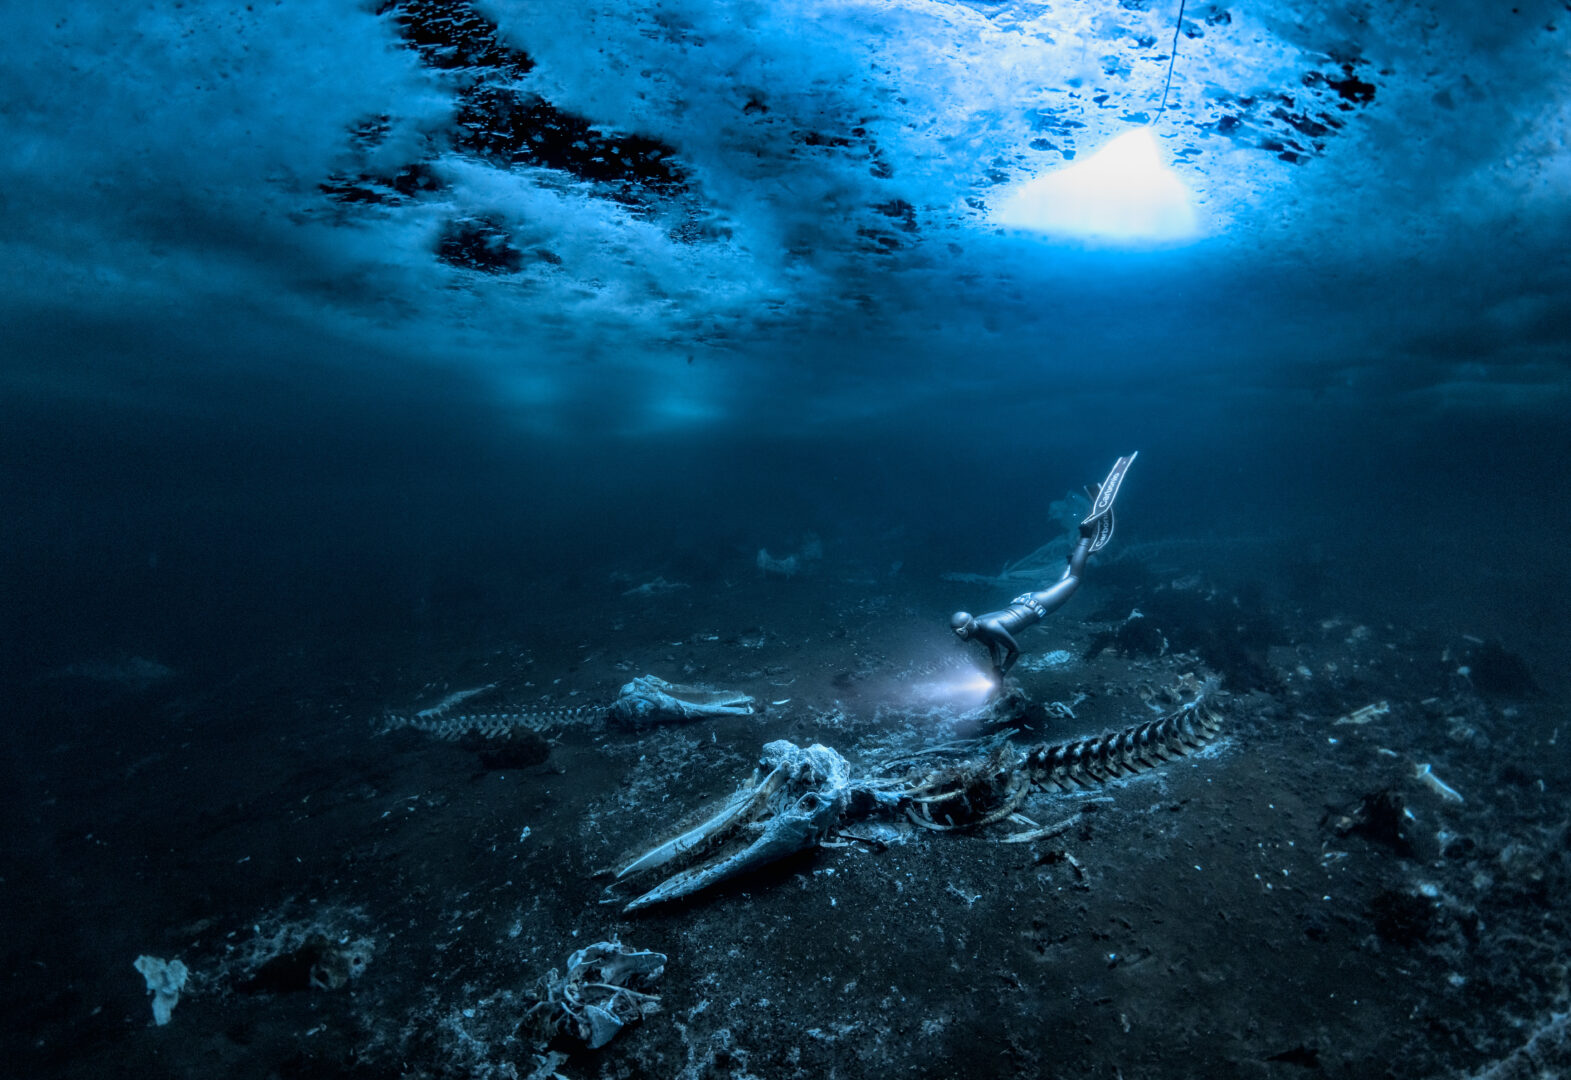 the skeleton of a Minke whale rests on the ocean floor, bathed in blue light just below the icy surface